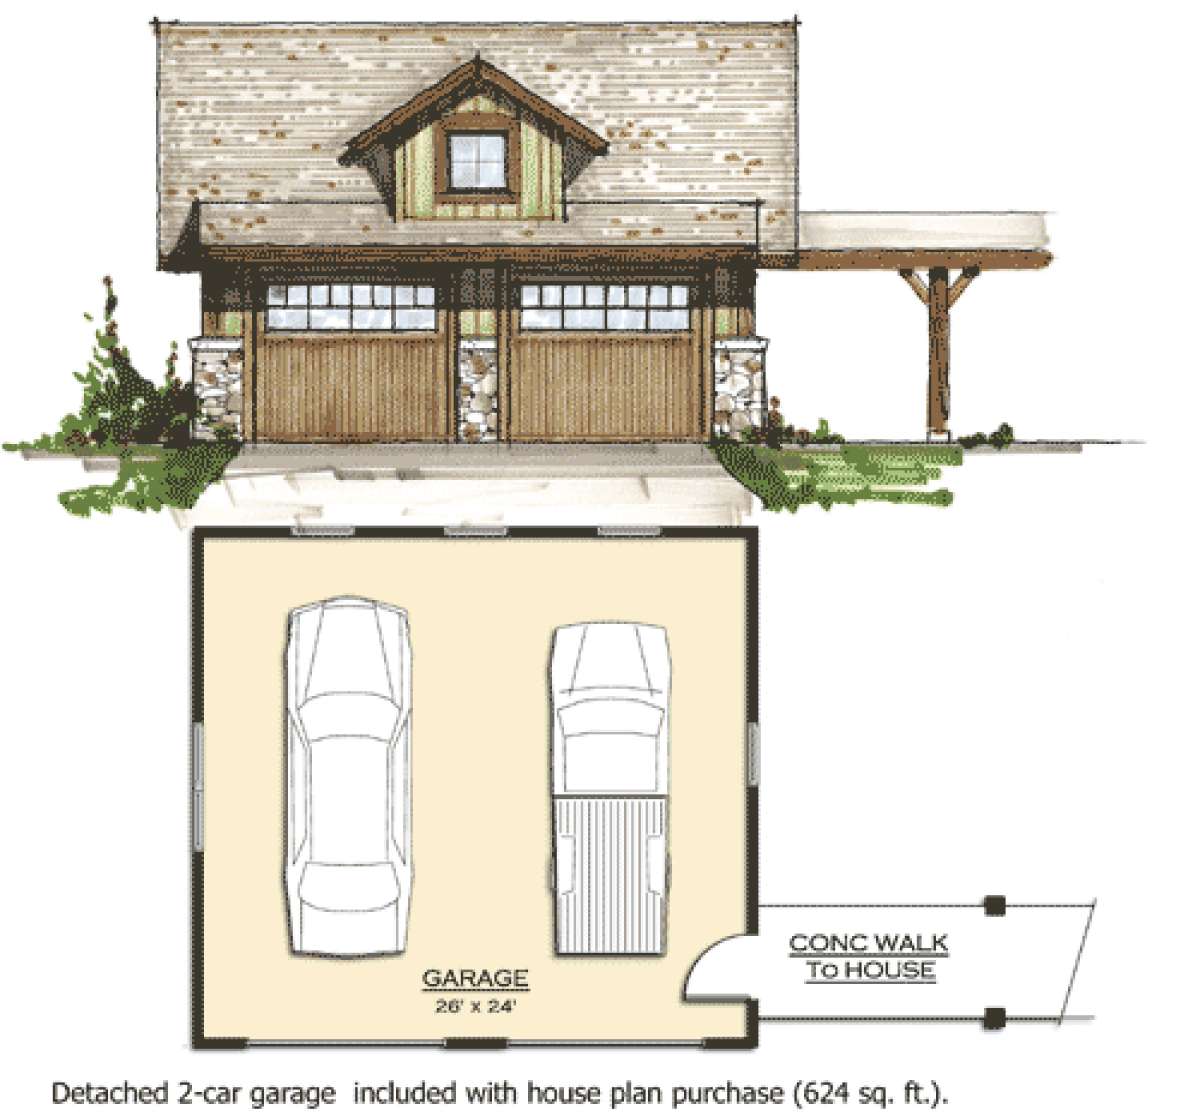 Garage for House Plan #8504-00047